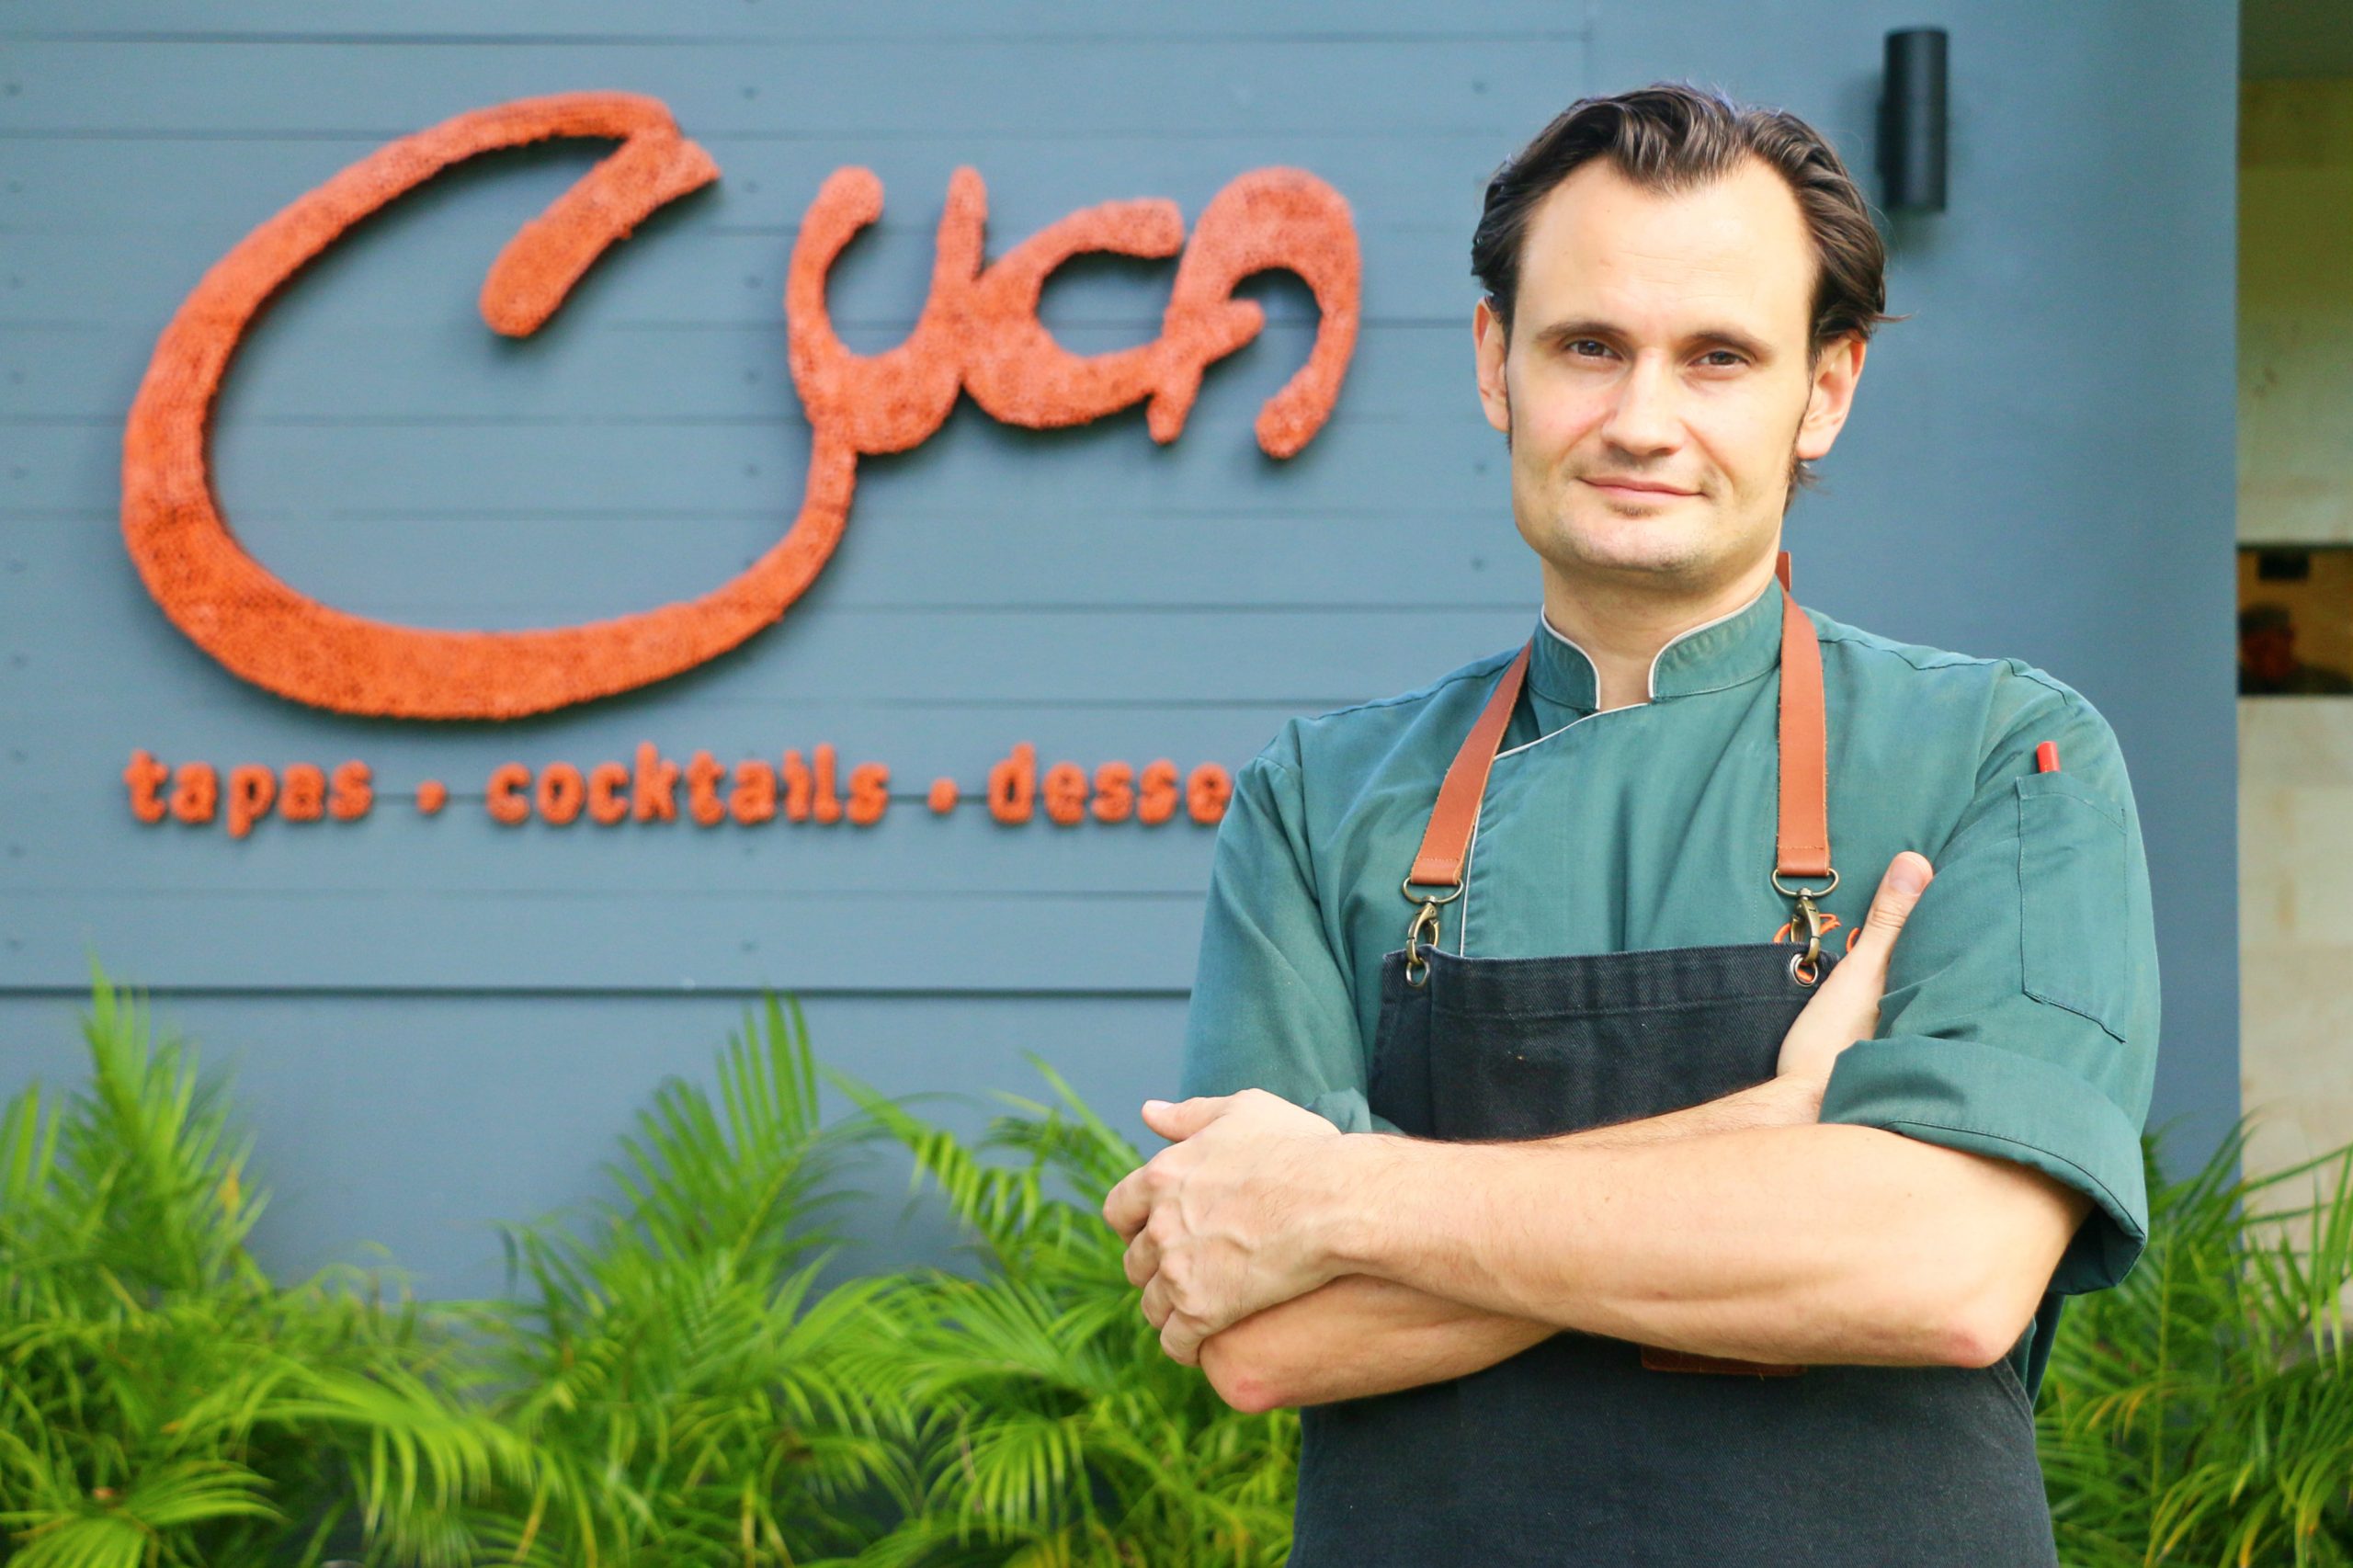 Kevin Cherkas, chef and owner Cuca 